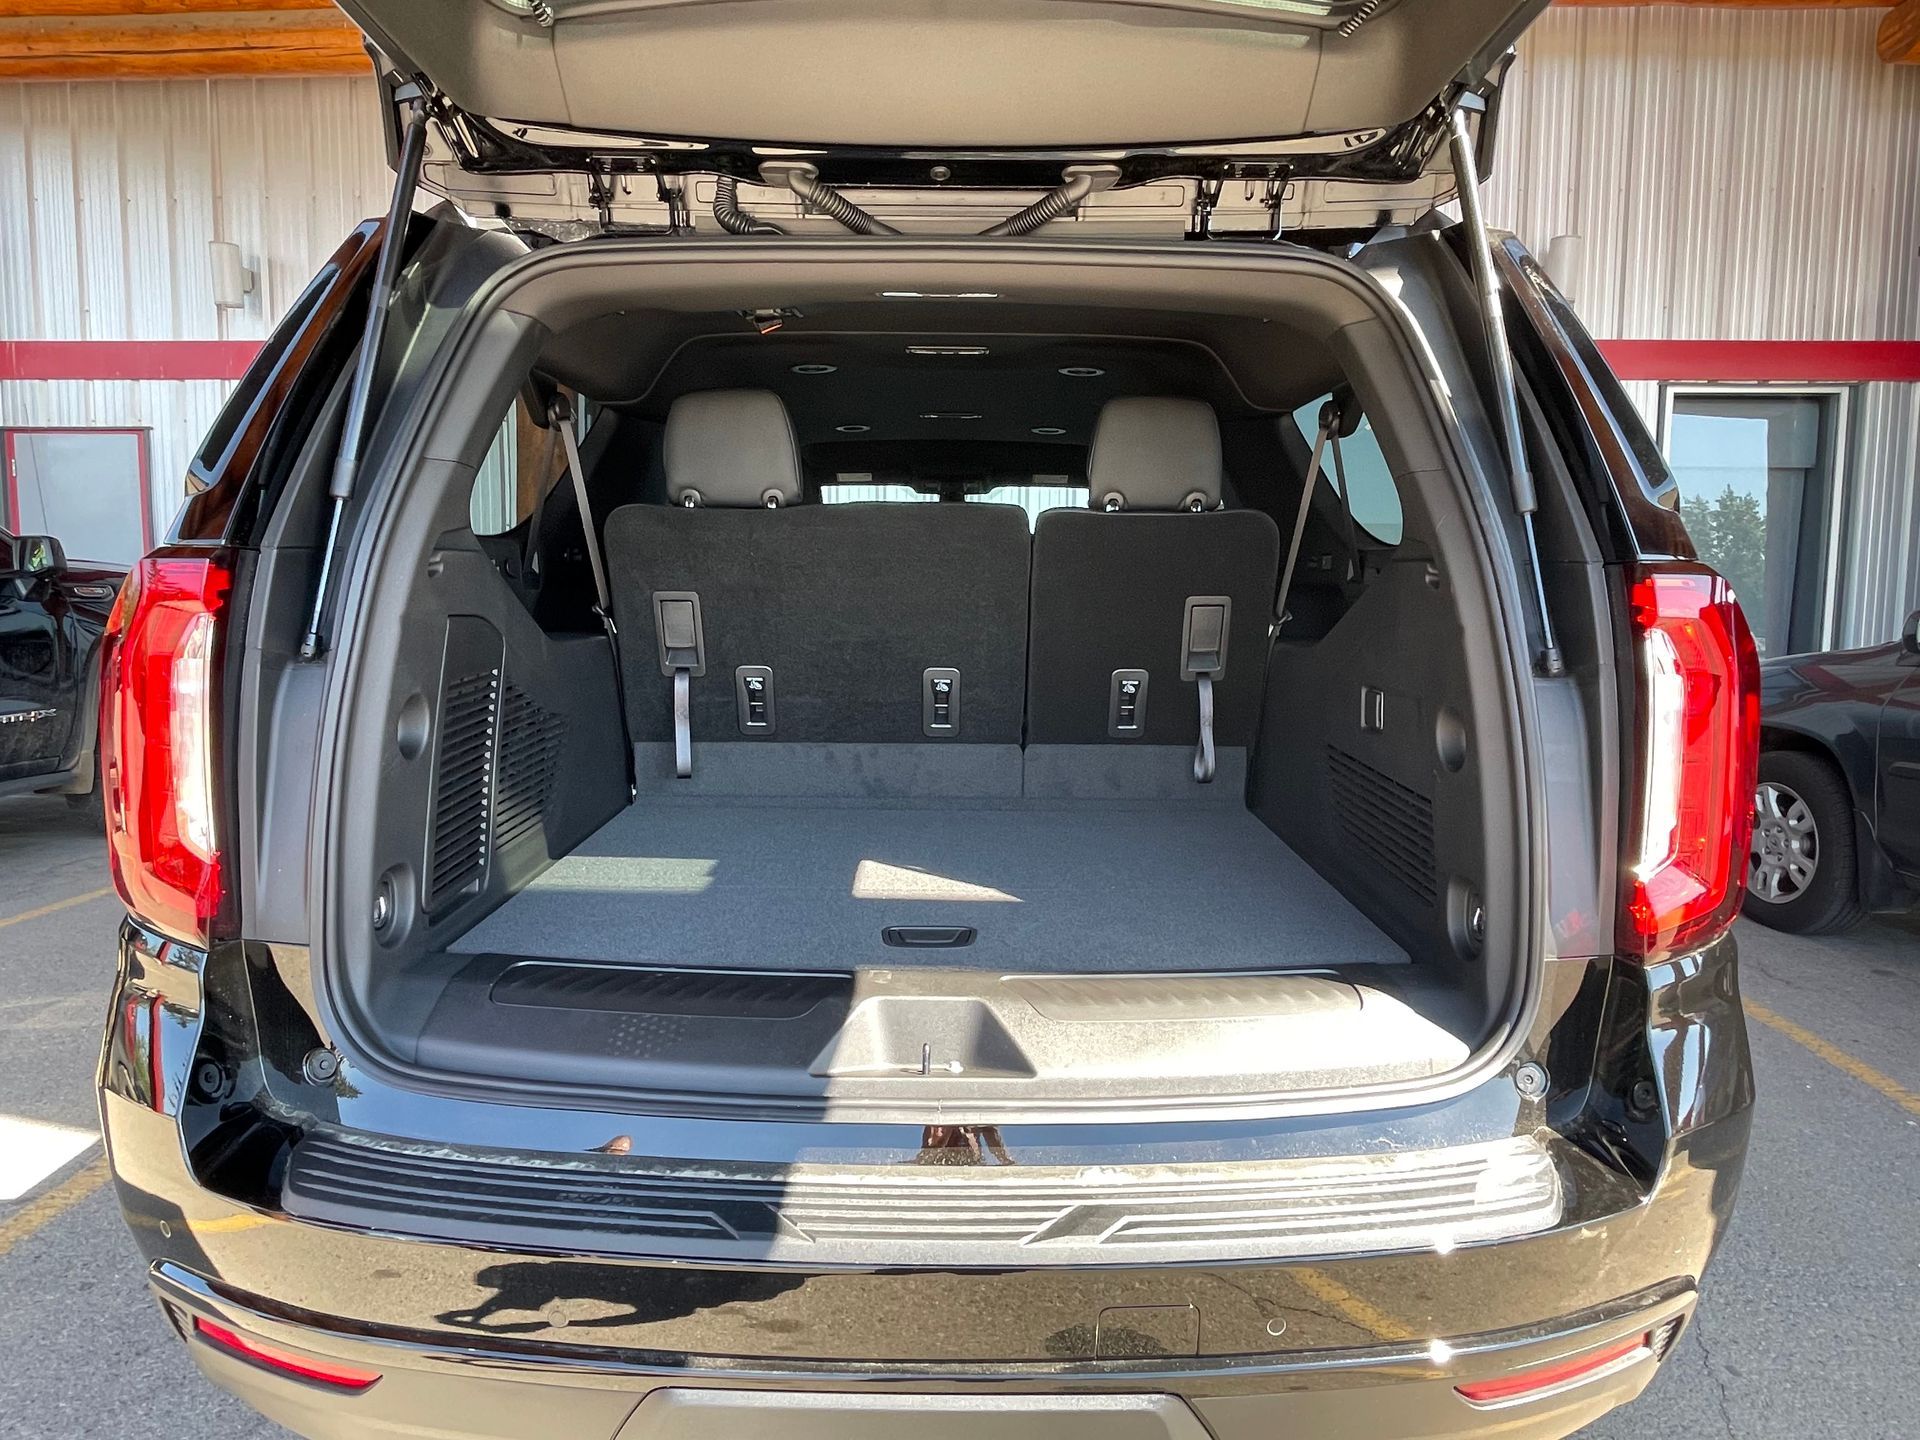 the trunk of a black Yukon suv is open and empty